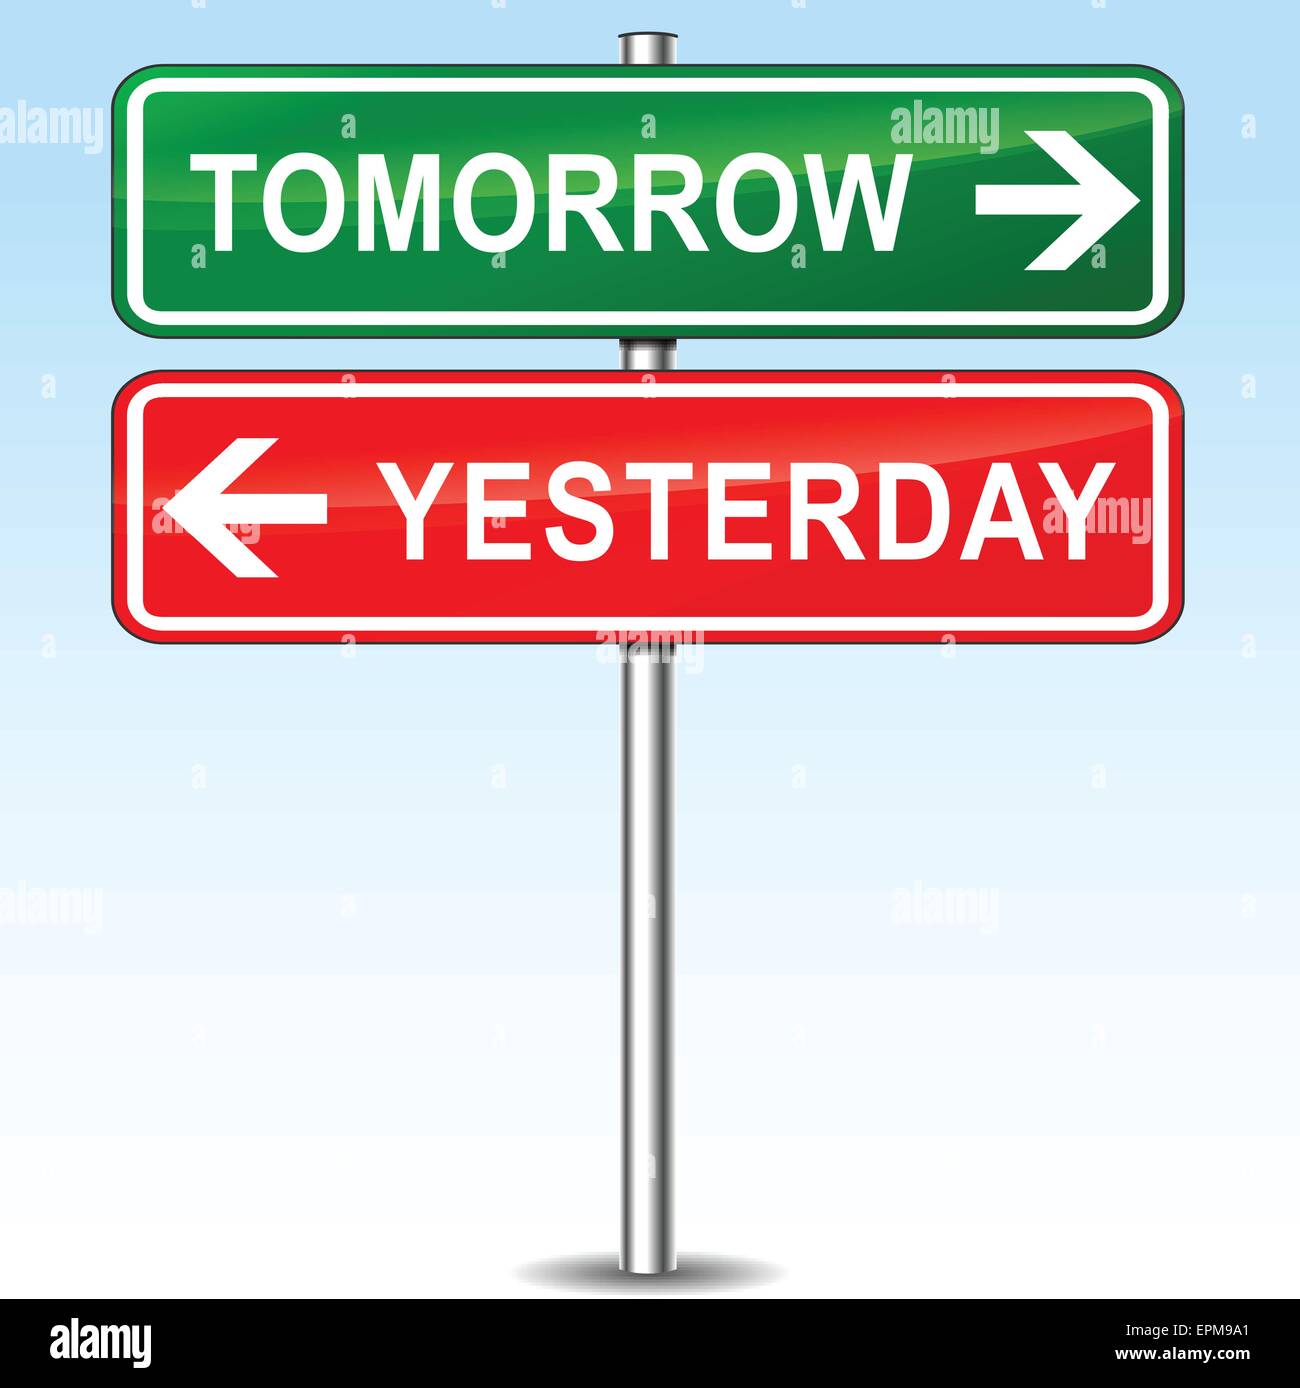 illustration of tomorrow and yesterday directions sign Stock Vector